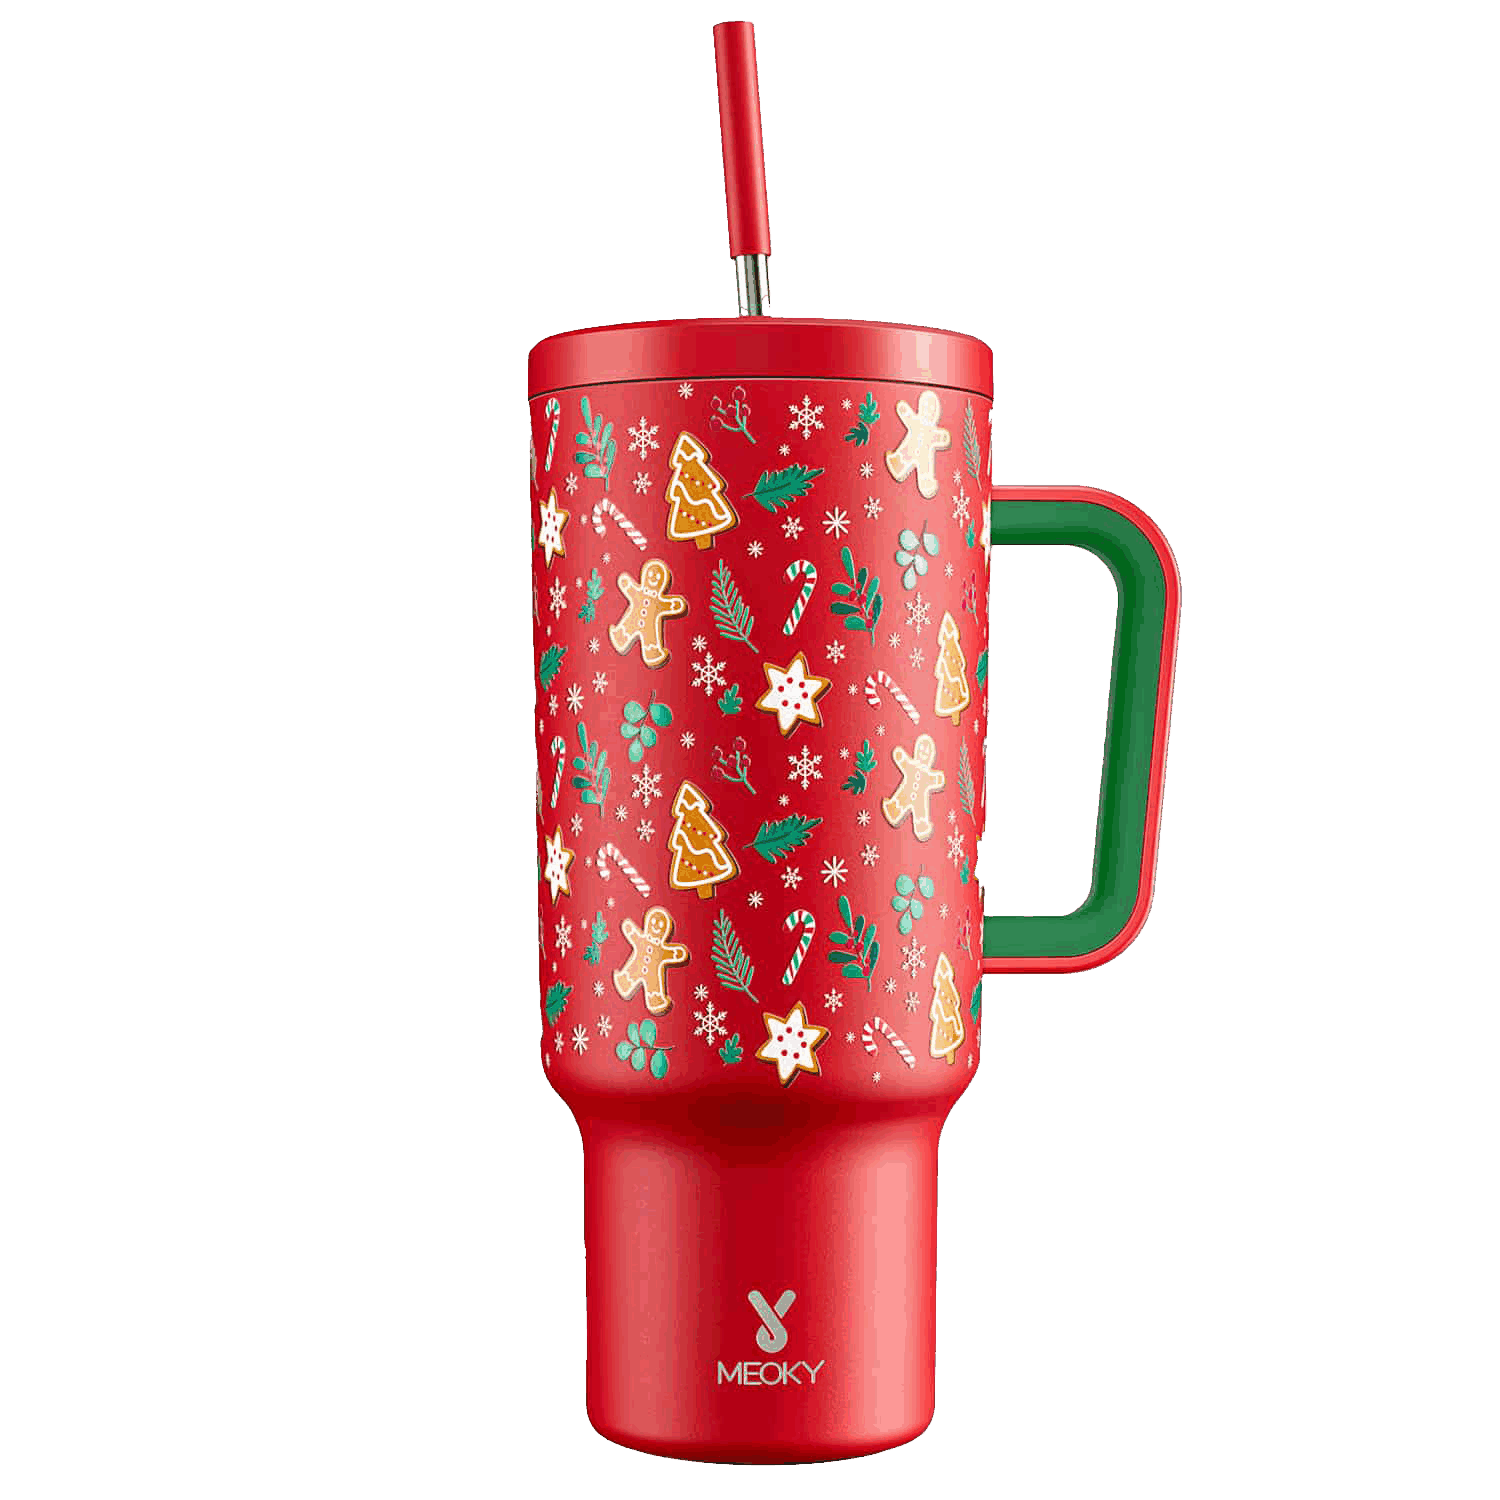 Meoky-40oz-tumbler-with-handle-and-straw-lid-Christmas-special-edition-Red